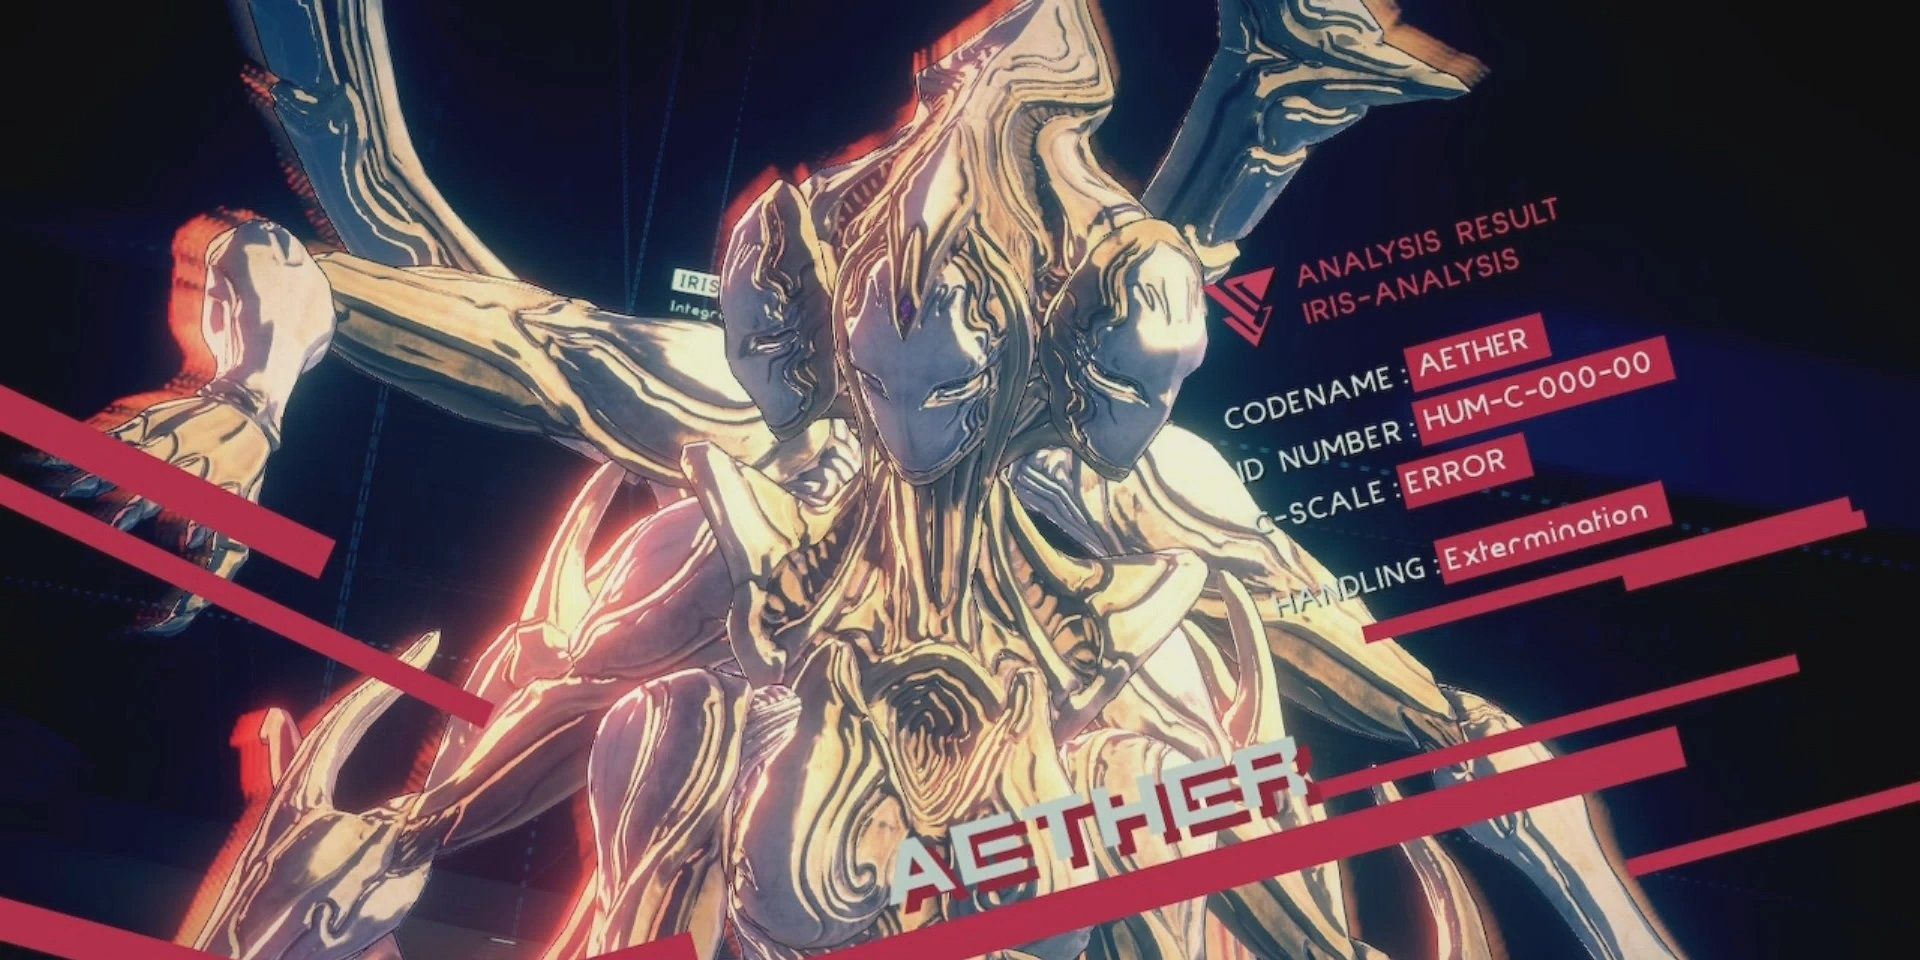 Introduction boss screen showing Aether from Astral Chain